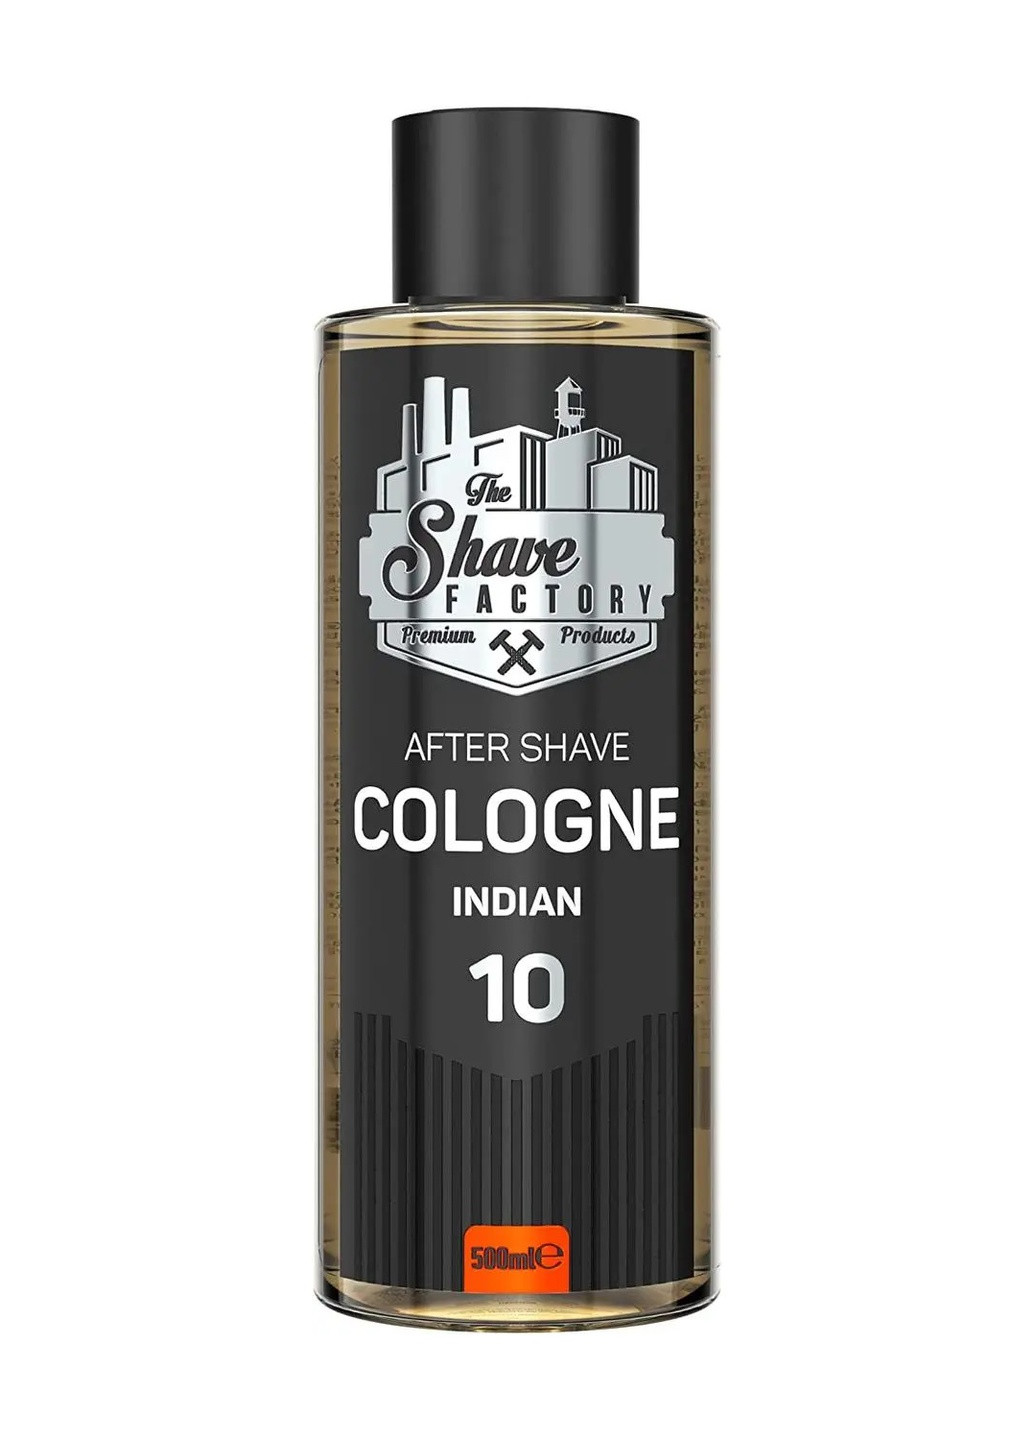 Одеколон после бритья After Shave Cologne Nr.10 Indian 500 мл The Shave Factory (257863085)